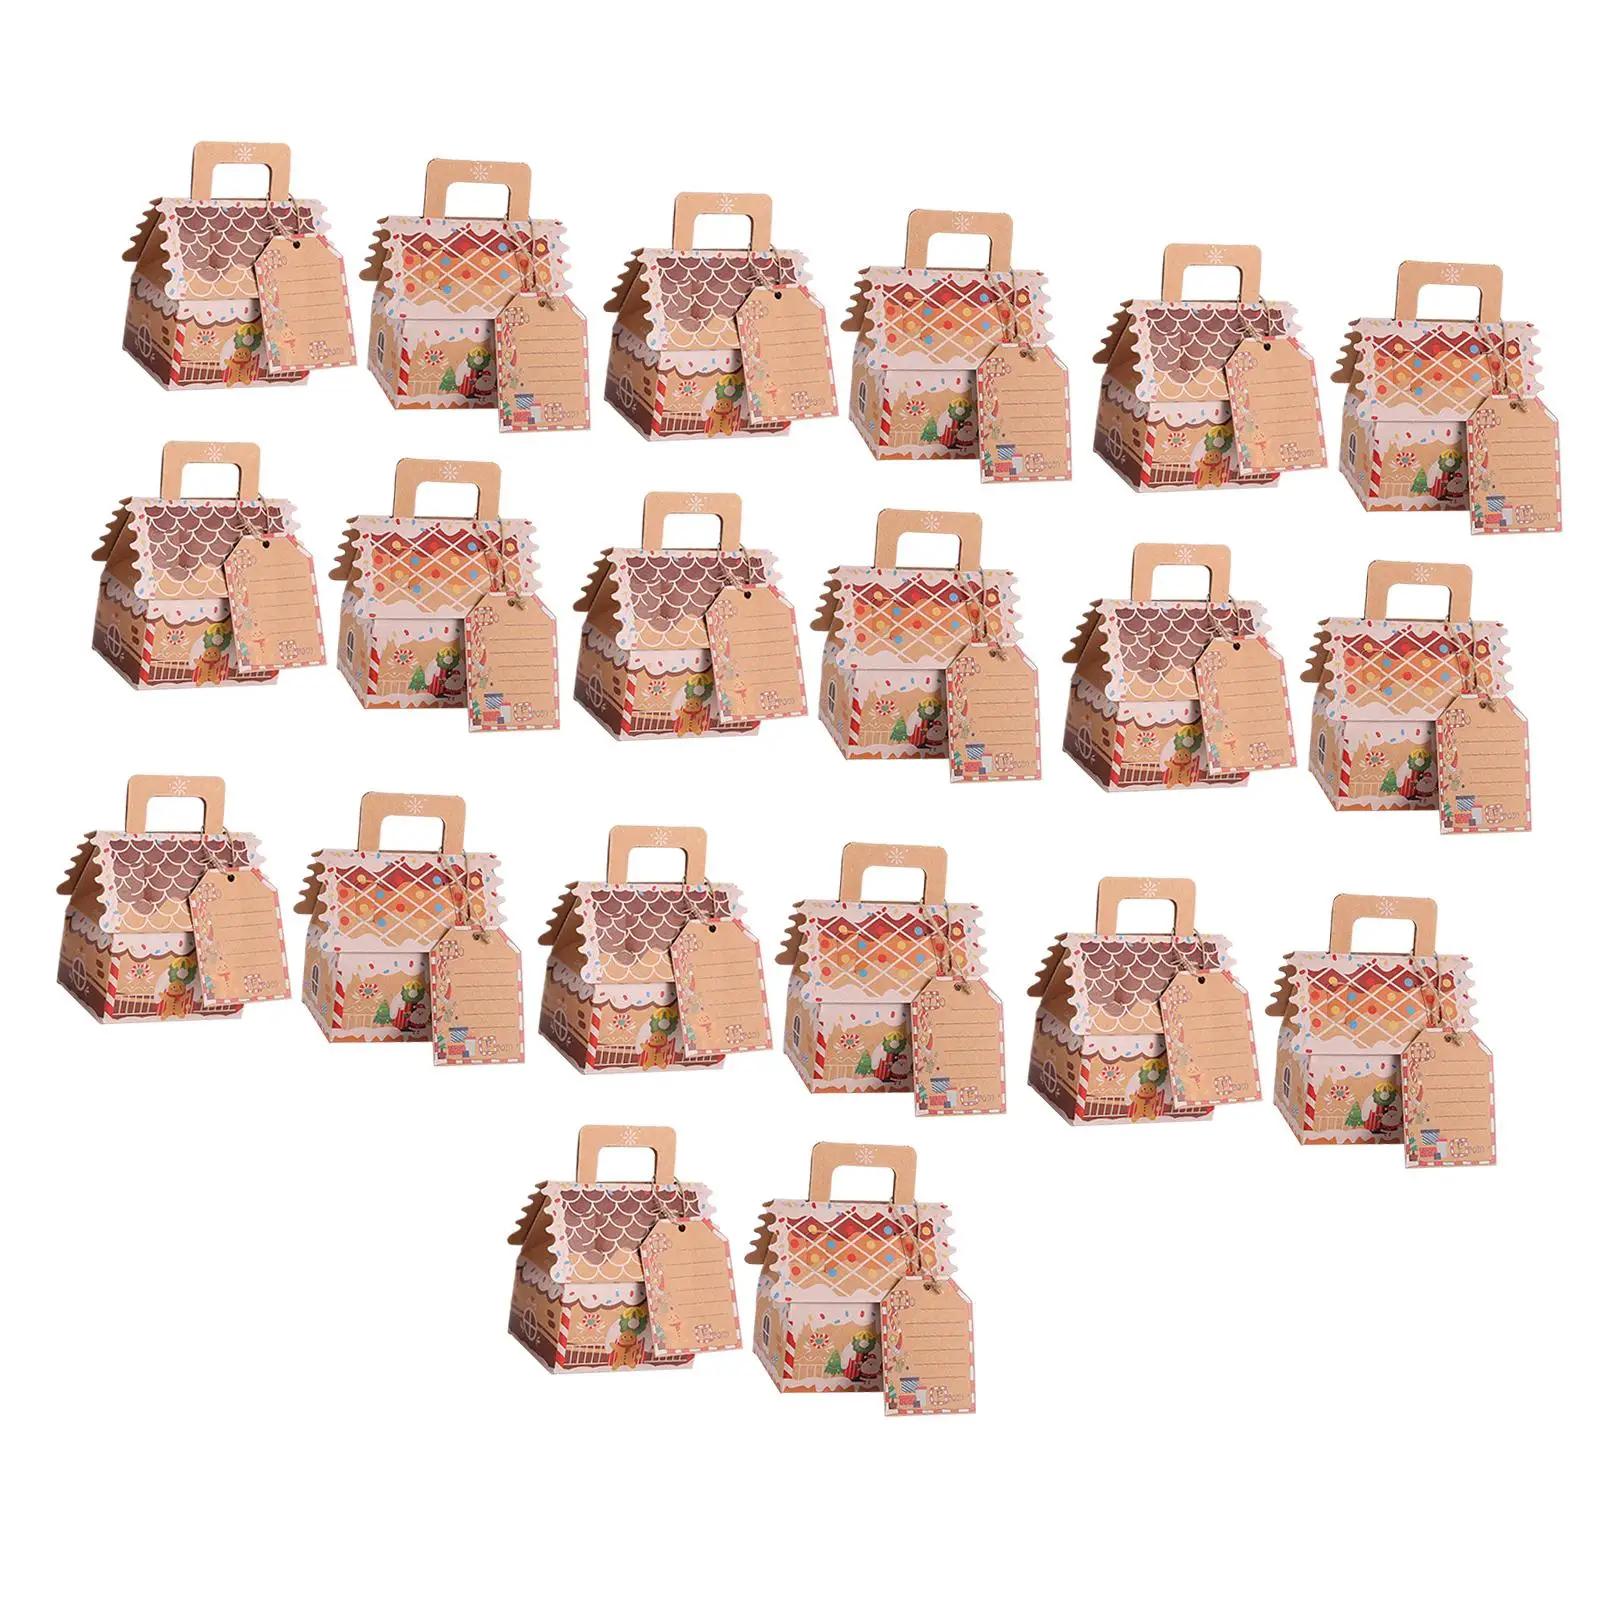 20x Candy Packing Box Cookie Gift Bag Pouch Packing Supply Candy Gift Bag for Wedding Christmas Party Birthday Holiday Pastry